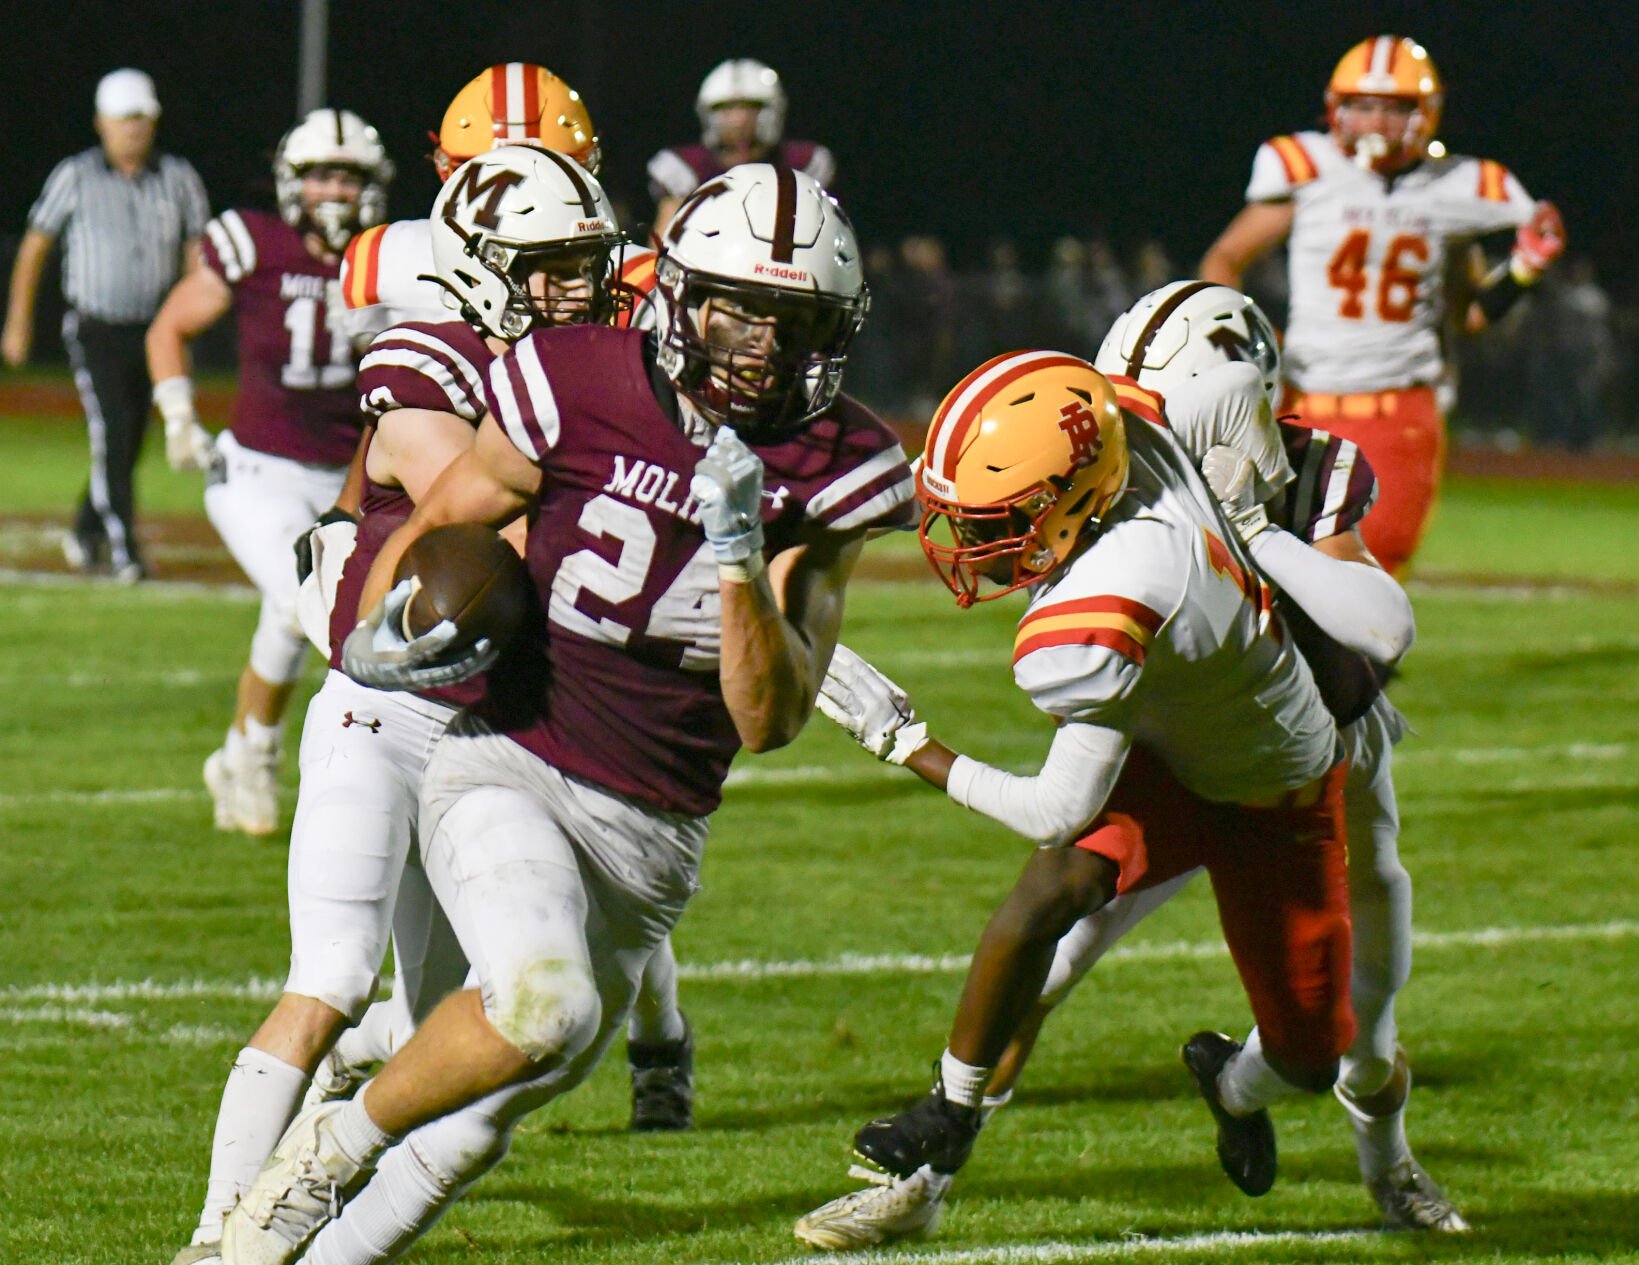 Moline dominates Rock Island with a 28-10 victory